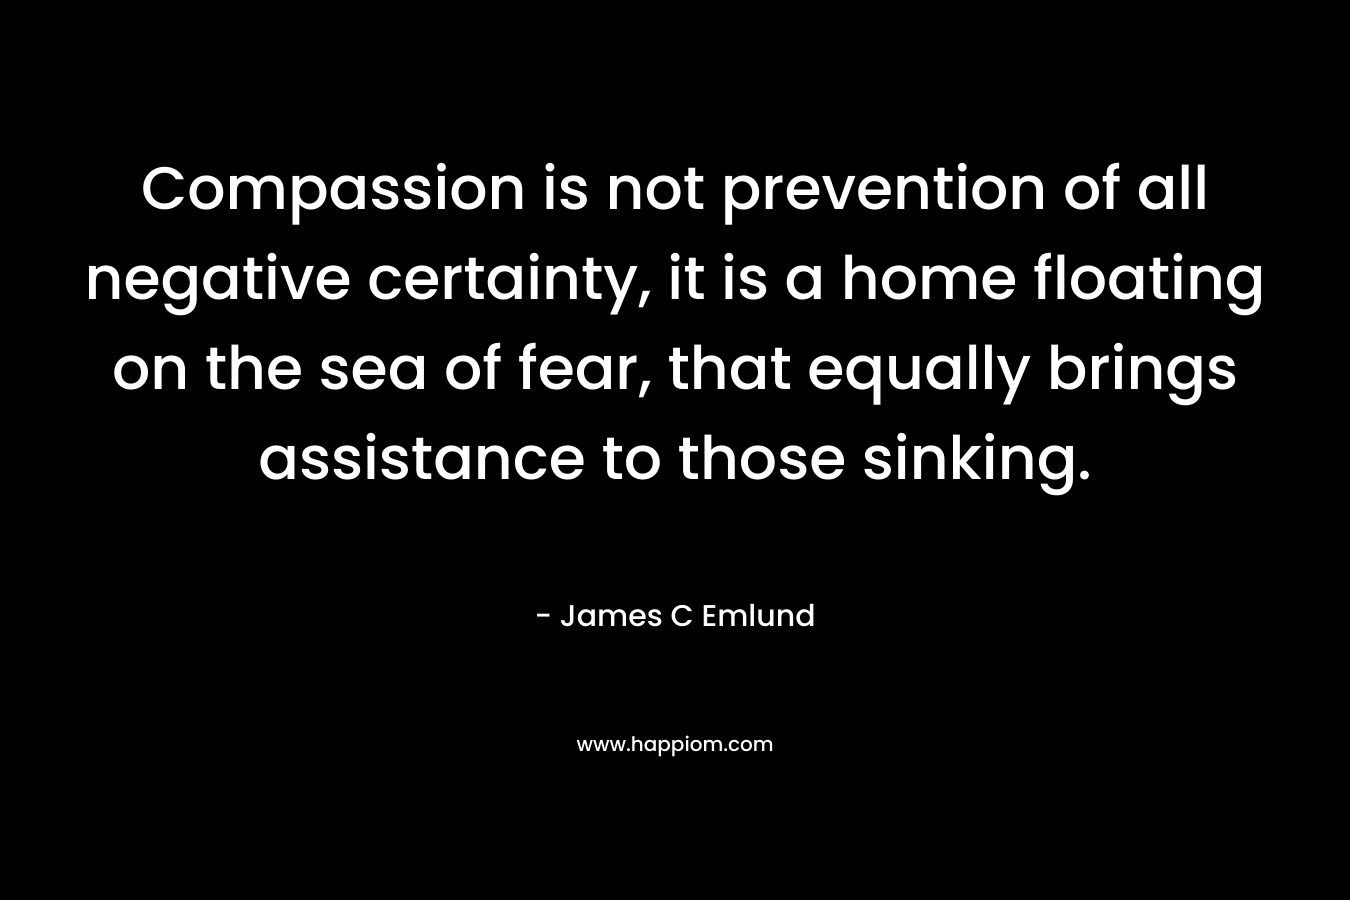 Compassion is not prevention of all negative certainty, it is a home floating on the sea of fear, that equally brings assistance to those sinking. – James C Emlund